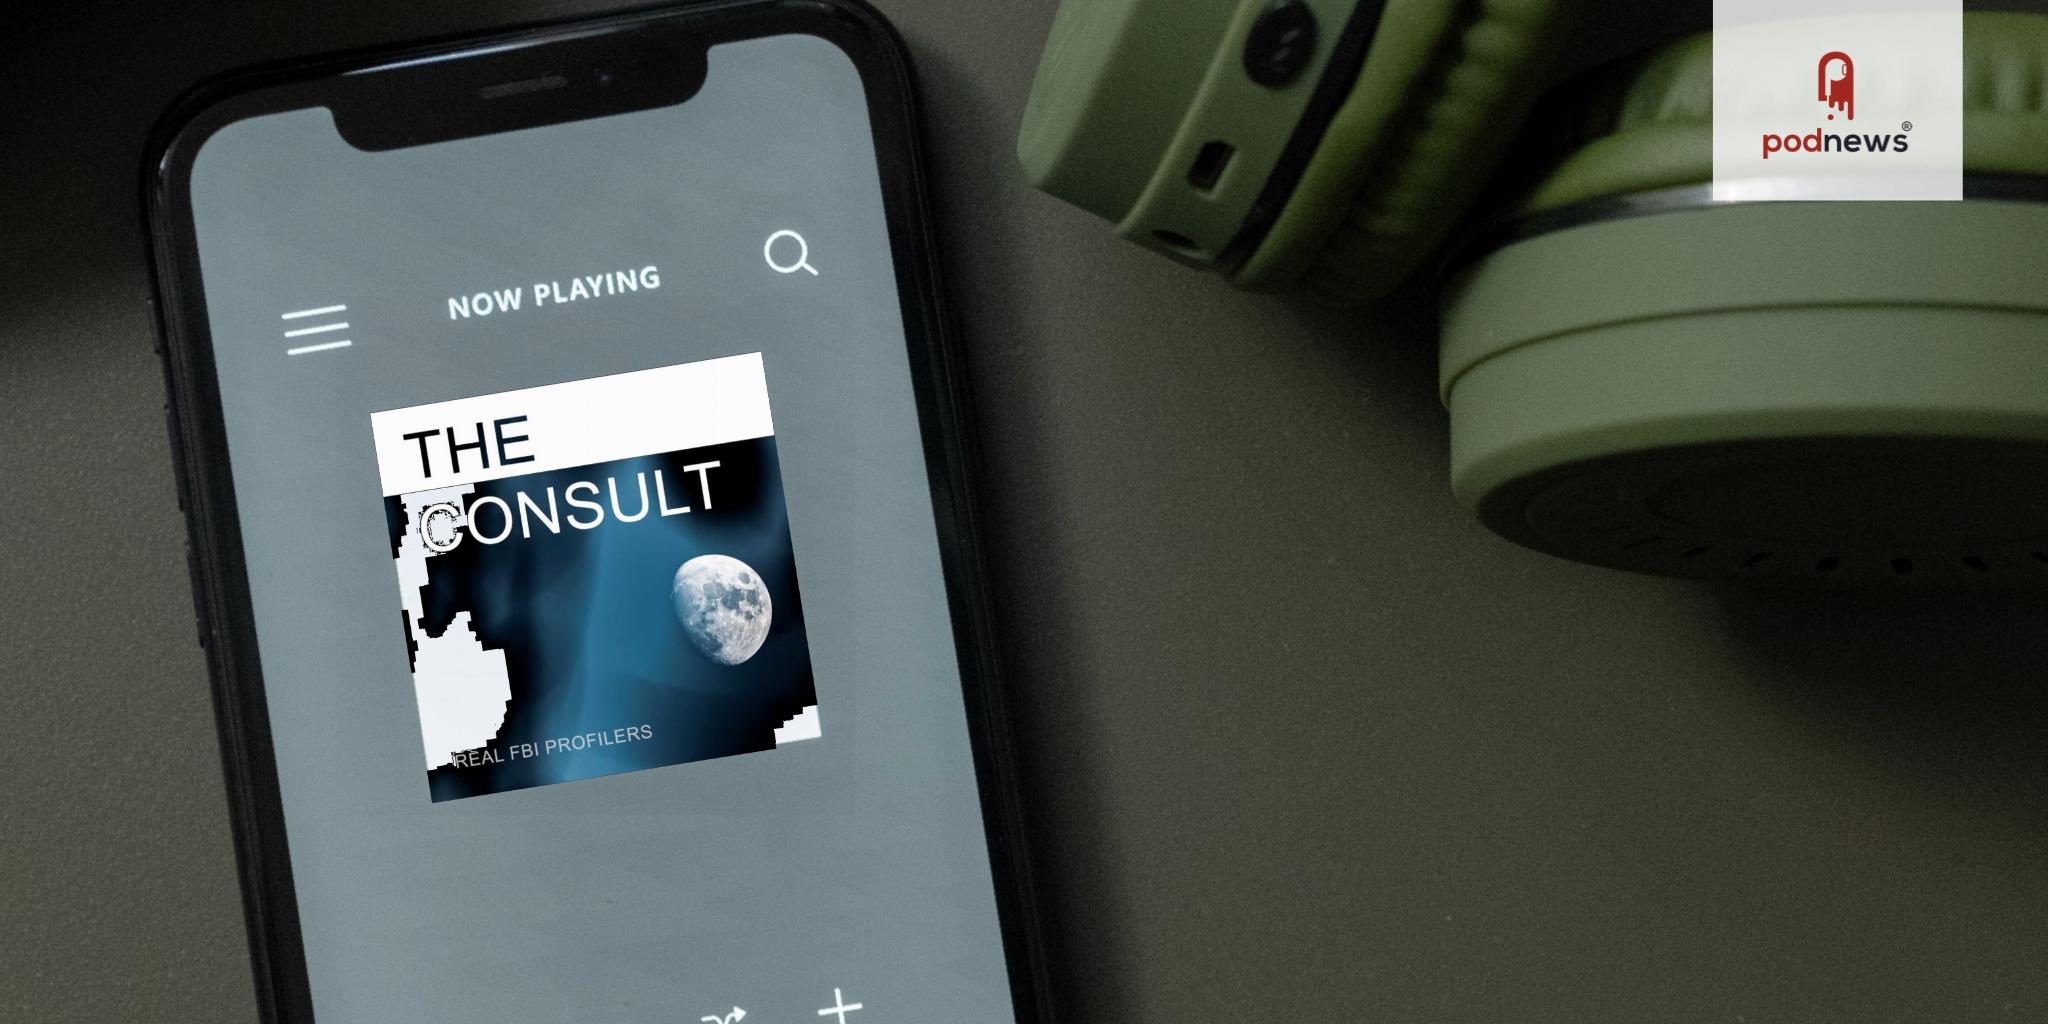 PodcastOne Acquires Exclusive Rights to FBI Profiler Podcast The Consult: The Real FBI Profilers